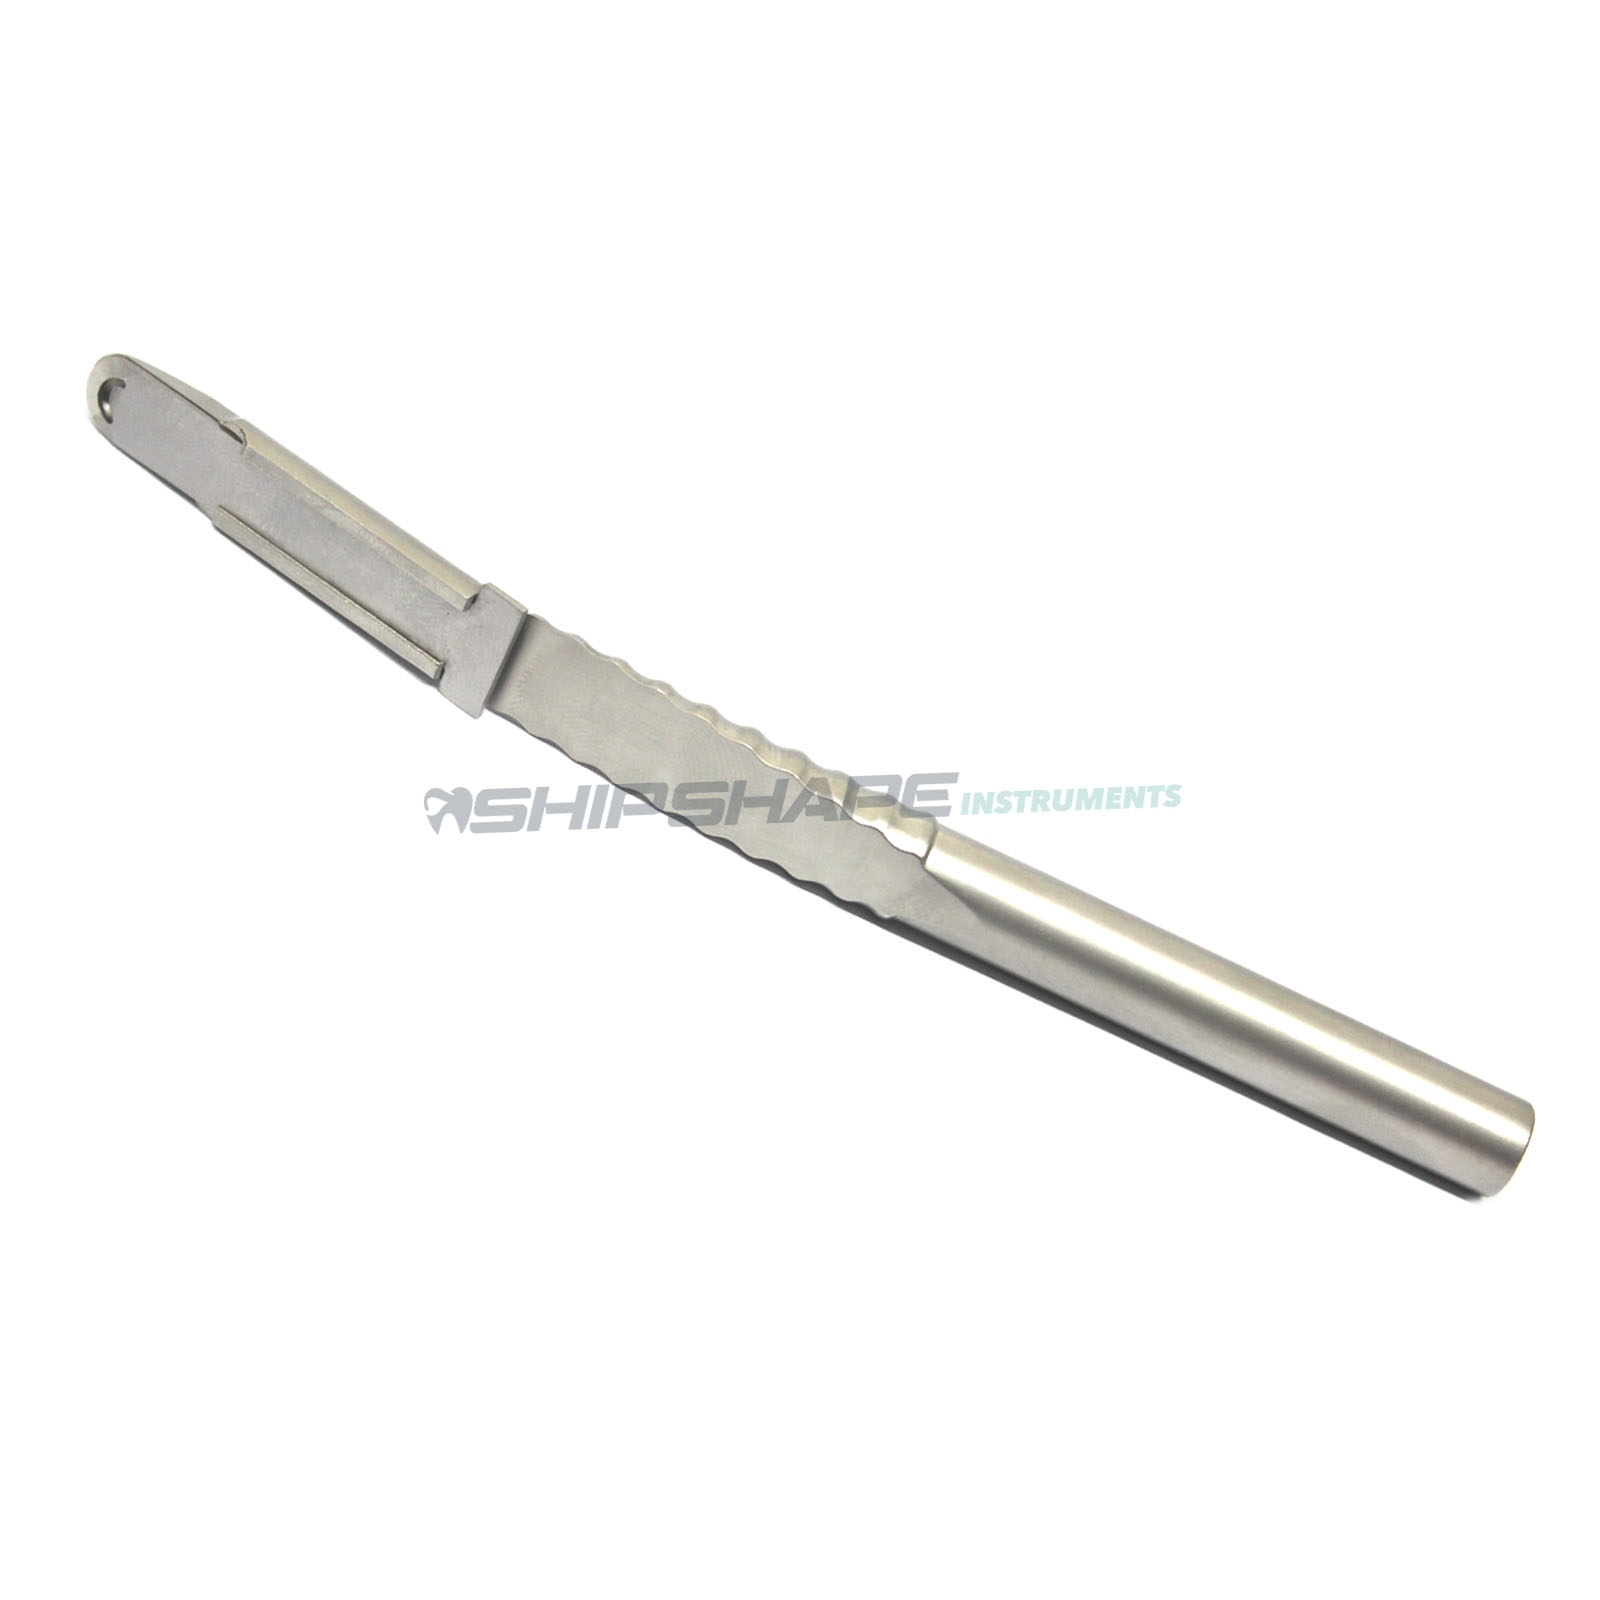 Dental Implant Bone Scraper Curved Grafting Bone Surgery Instrument Stainless Steel Tool Surgical Collector (Included 1 Blade)-1238